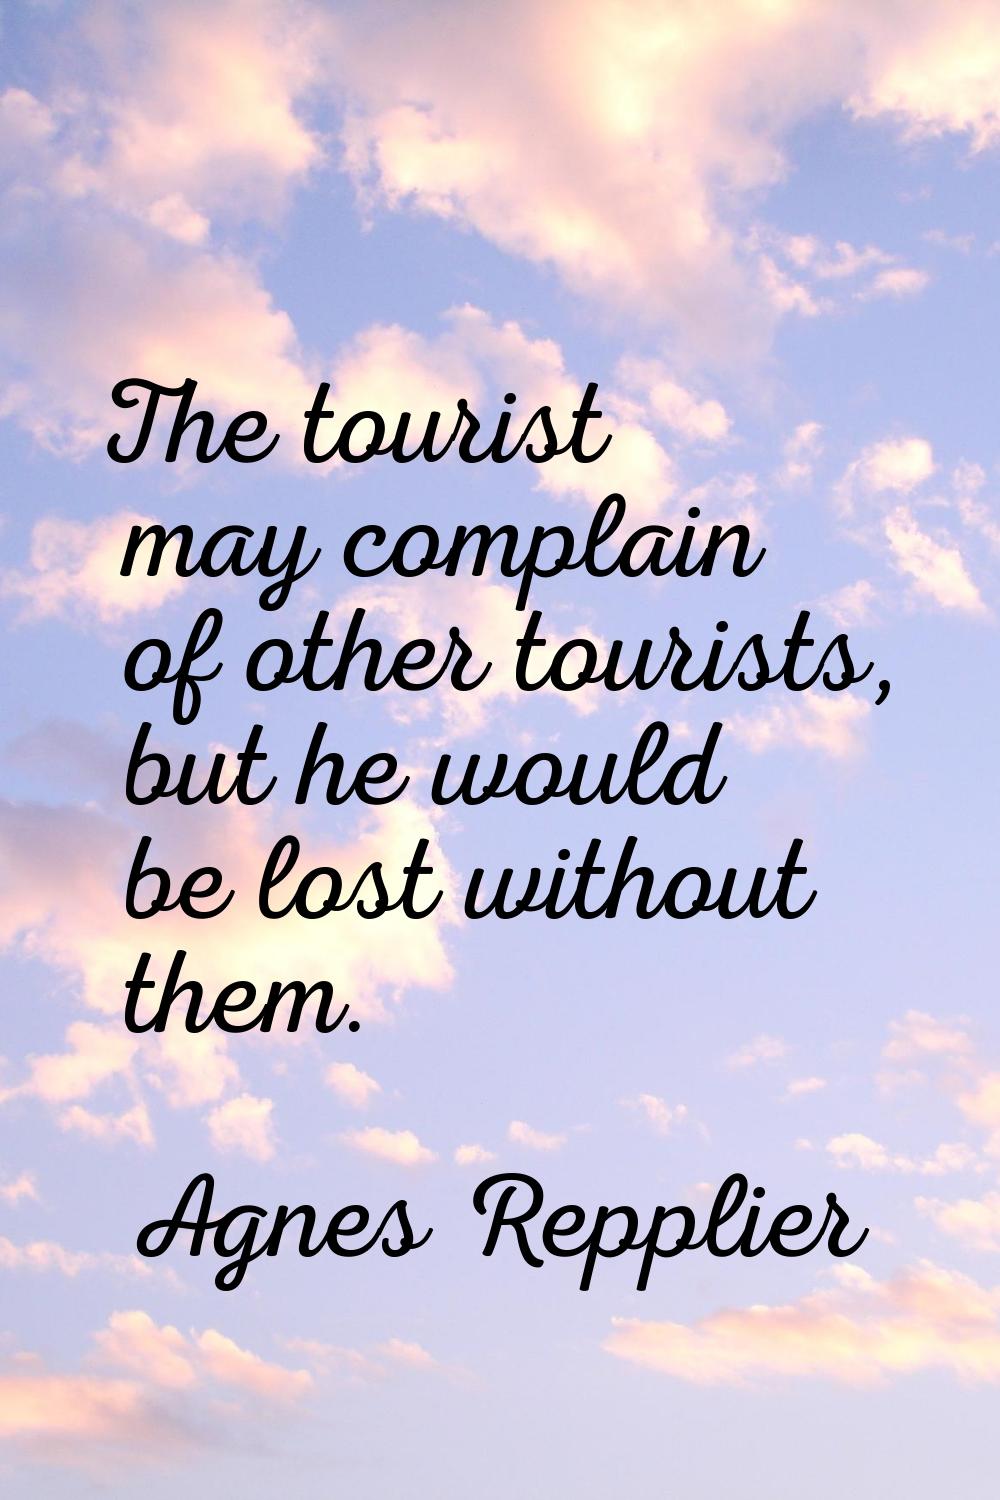 The tourist may complain of other tourists, but he would be lost without them.